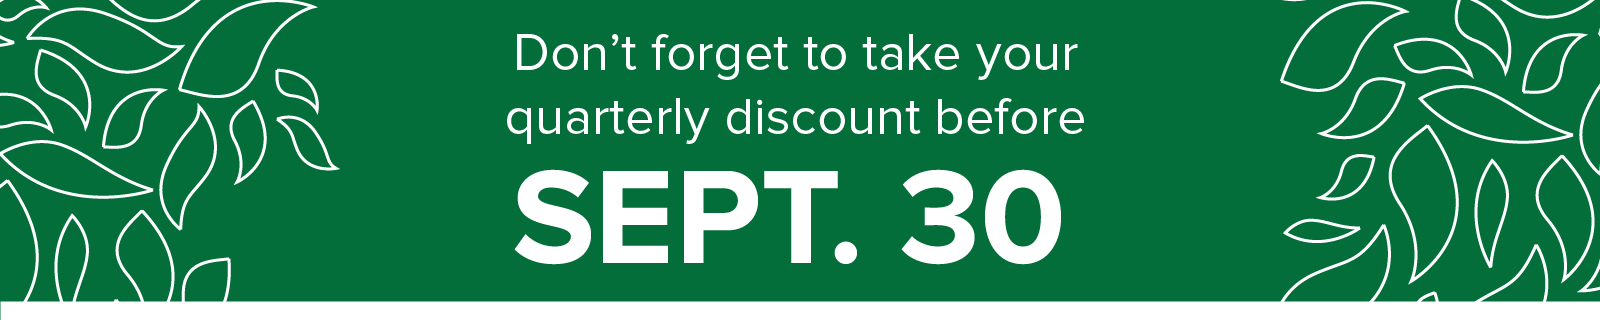 don't forget to take your quarterly owner discount by sept. 30